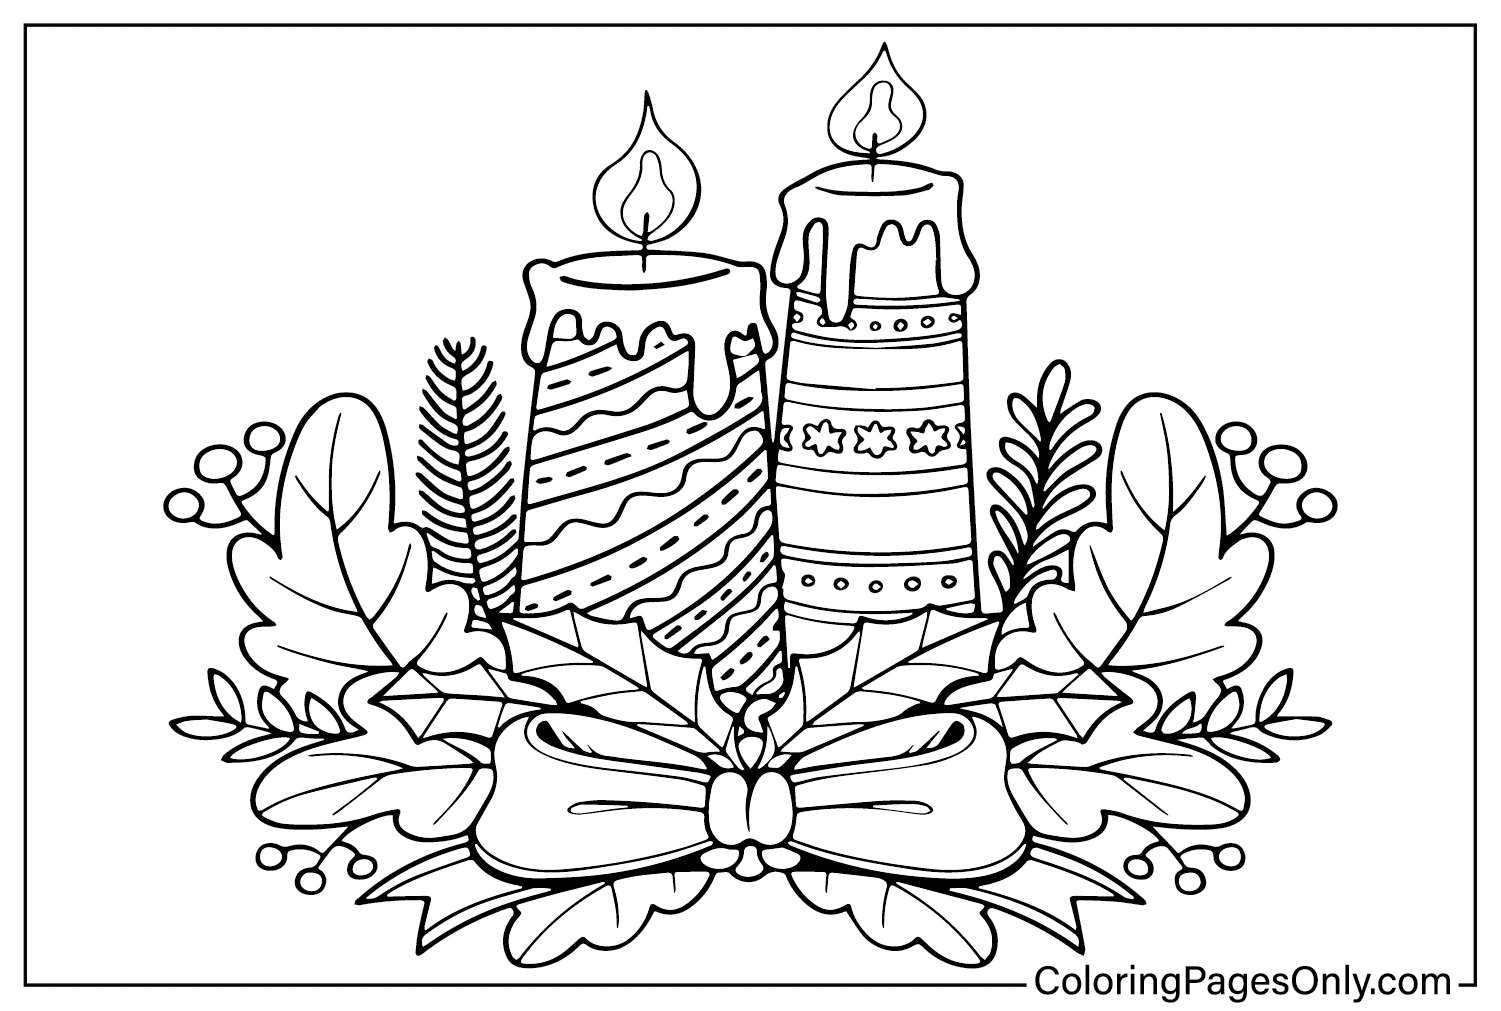 Advent Wreath Coloring Page Free from Advent Wreath